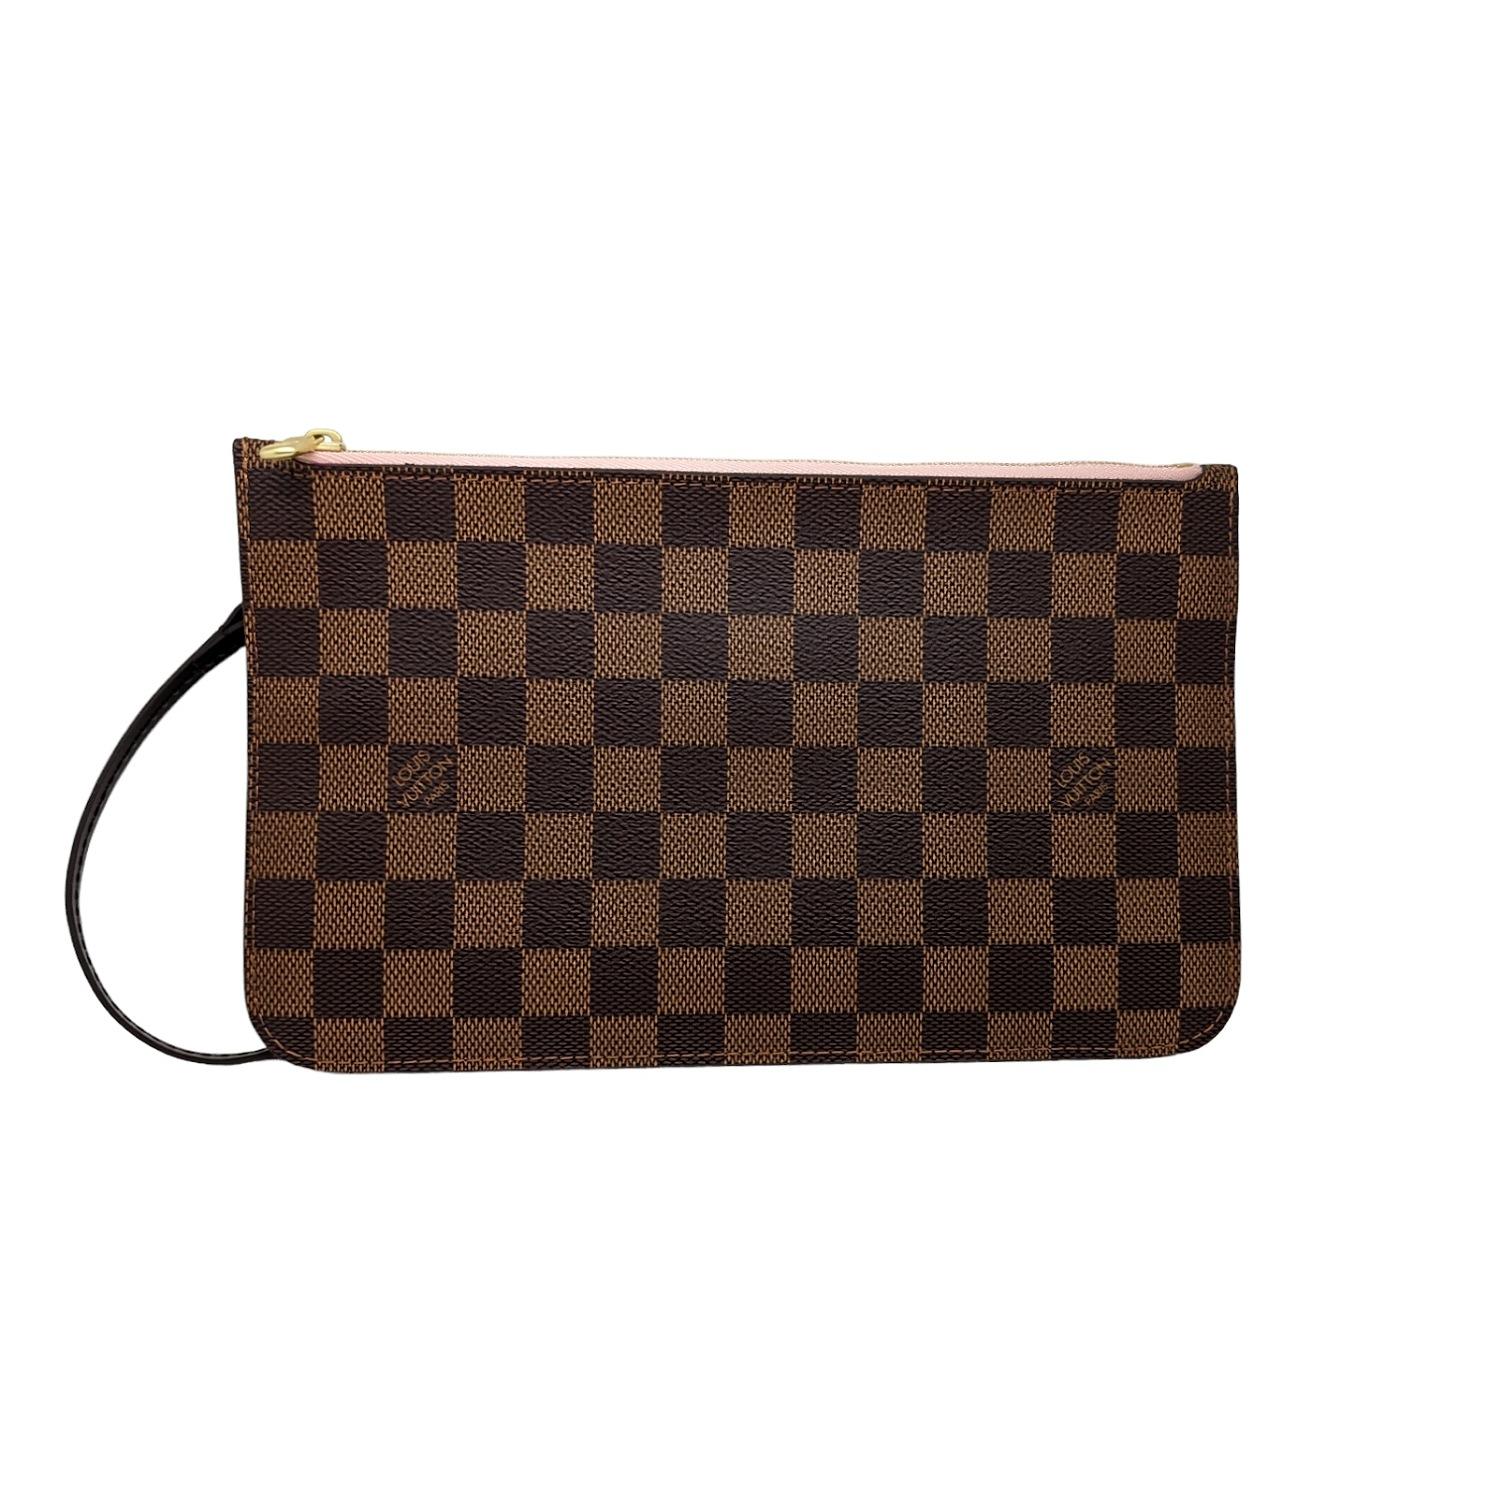 Louis Vuitton Damier Ebene Neverfull MM GM Pochette. This pochette is featured in signature Louis Vuitton checkered damier canvas. It includes a brown leather wristlet and a polished gold top zipper that opens to a ballerina pink striped fabric